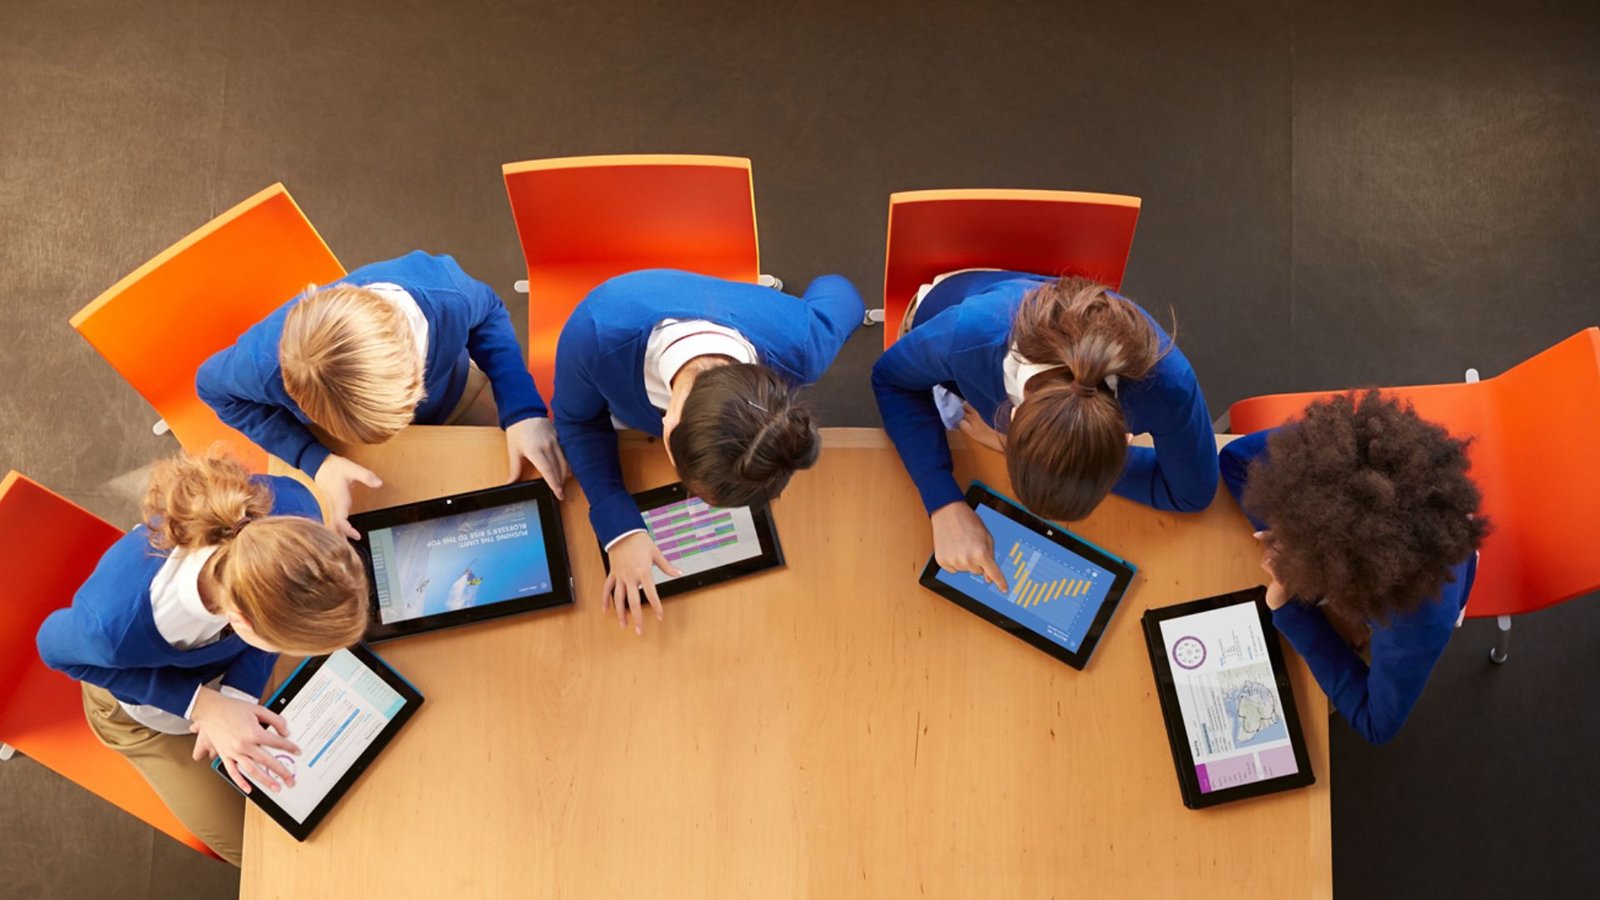 A Group of Students Using Tablets